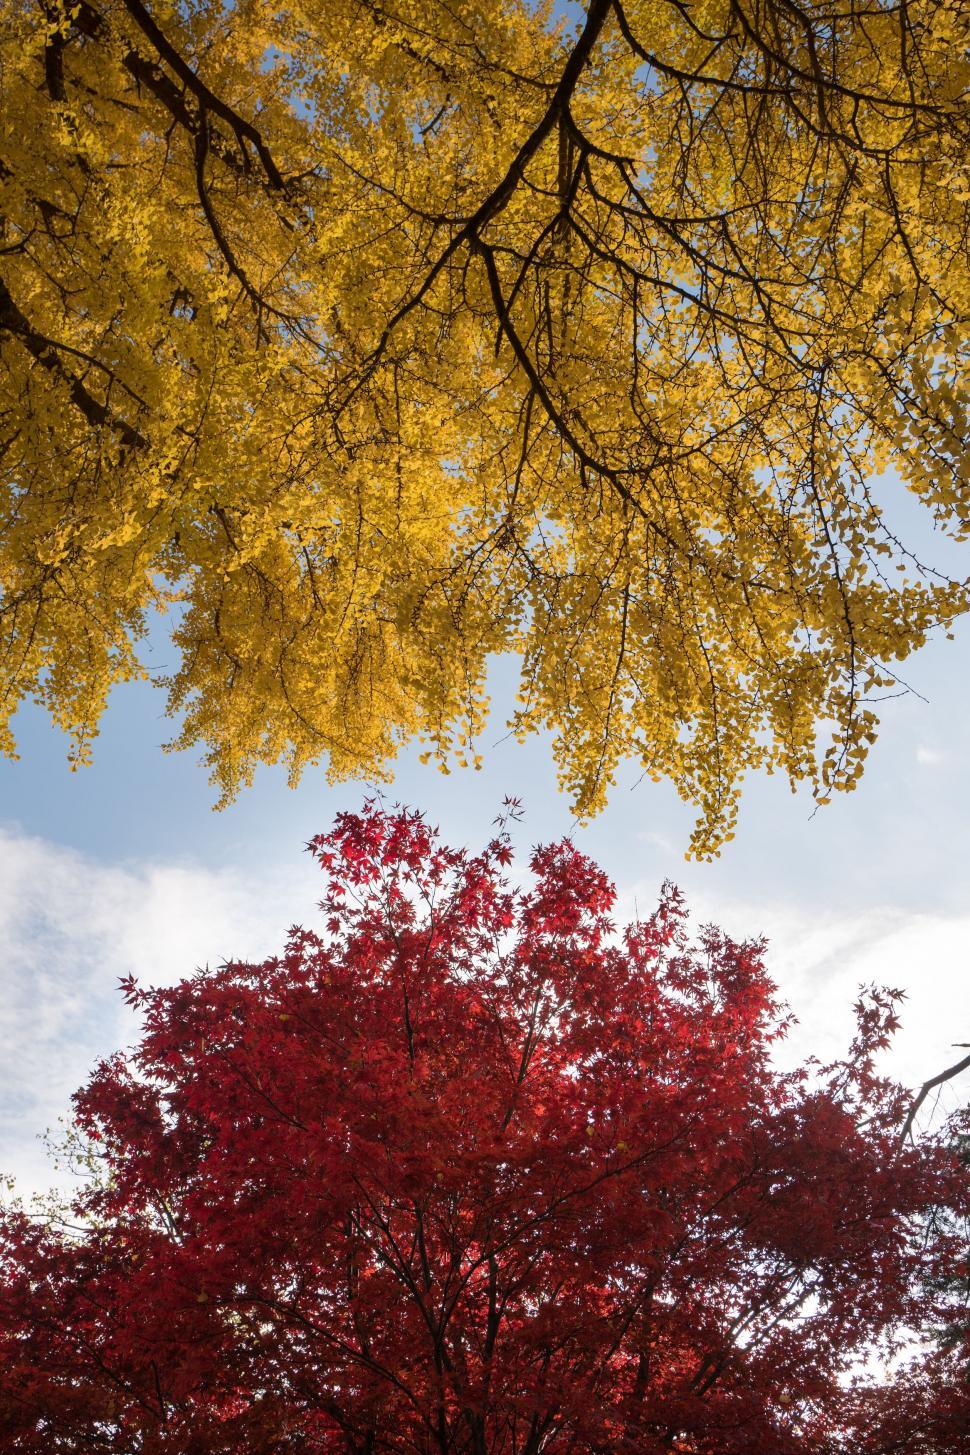 Free Image of Tree With Yellow and Red Leaves Under Blue Sky 